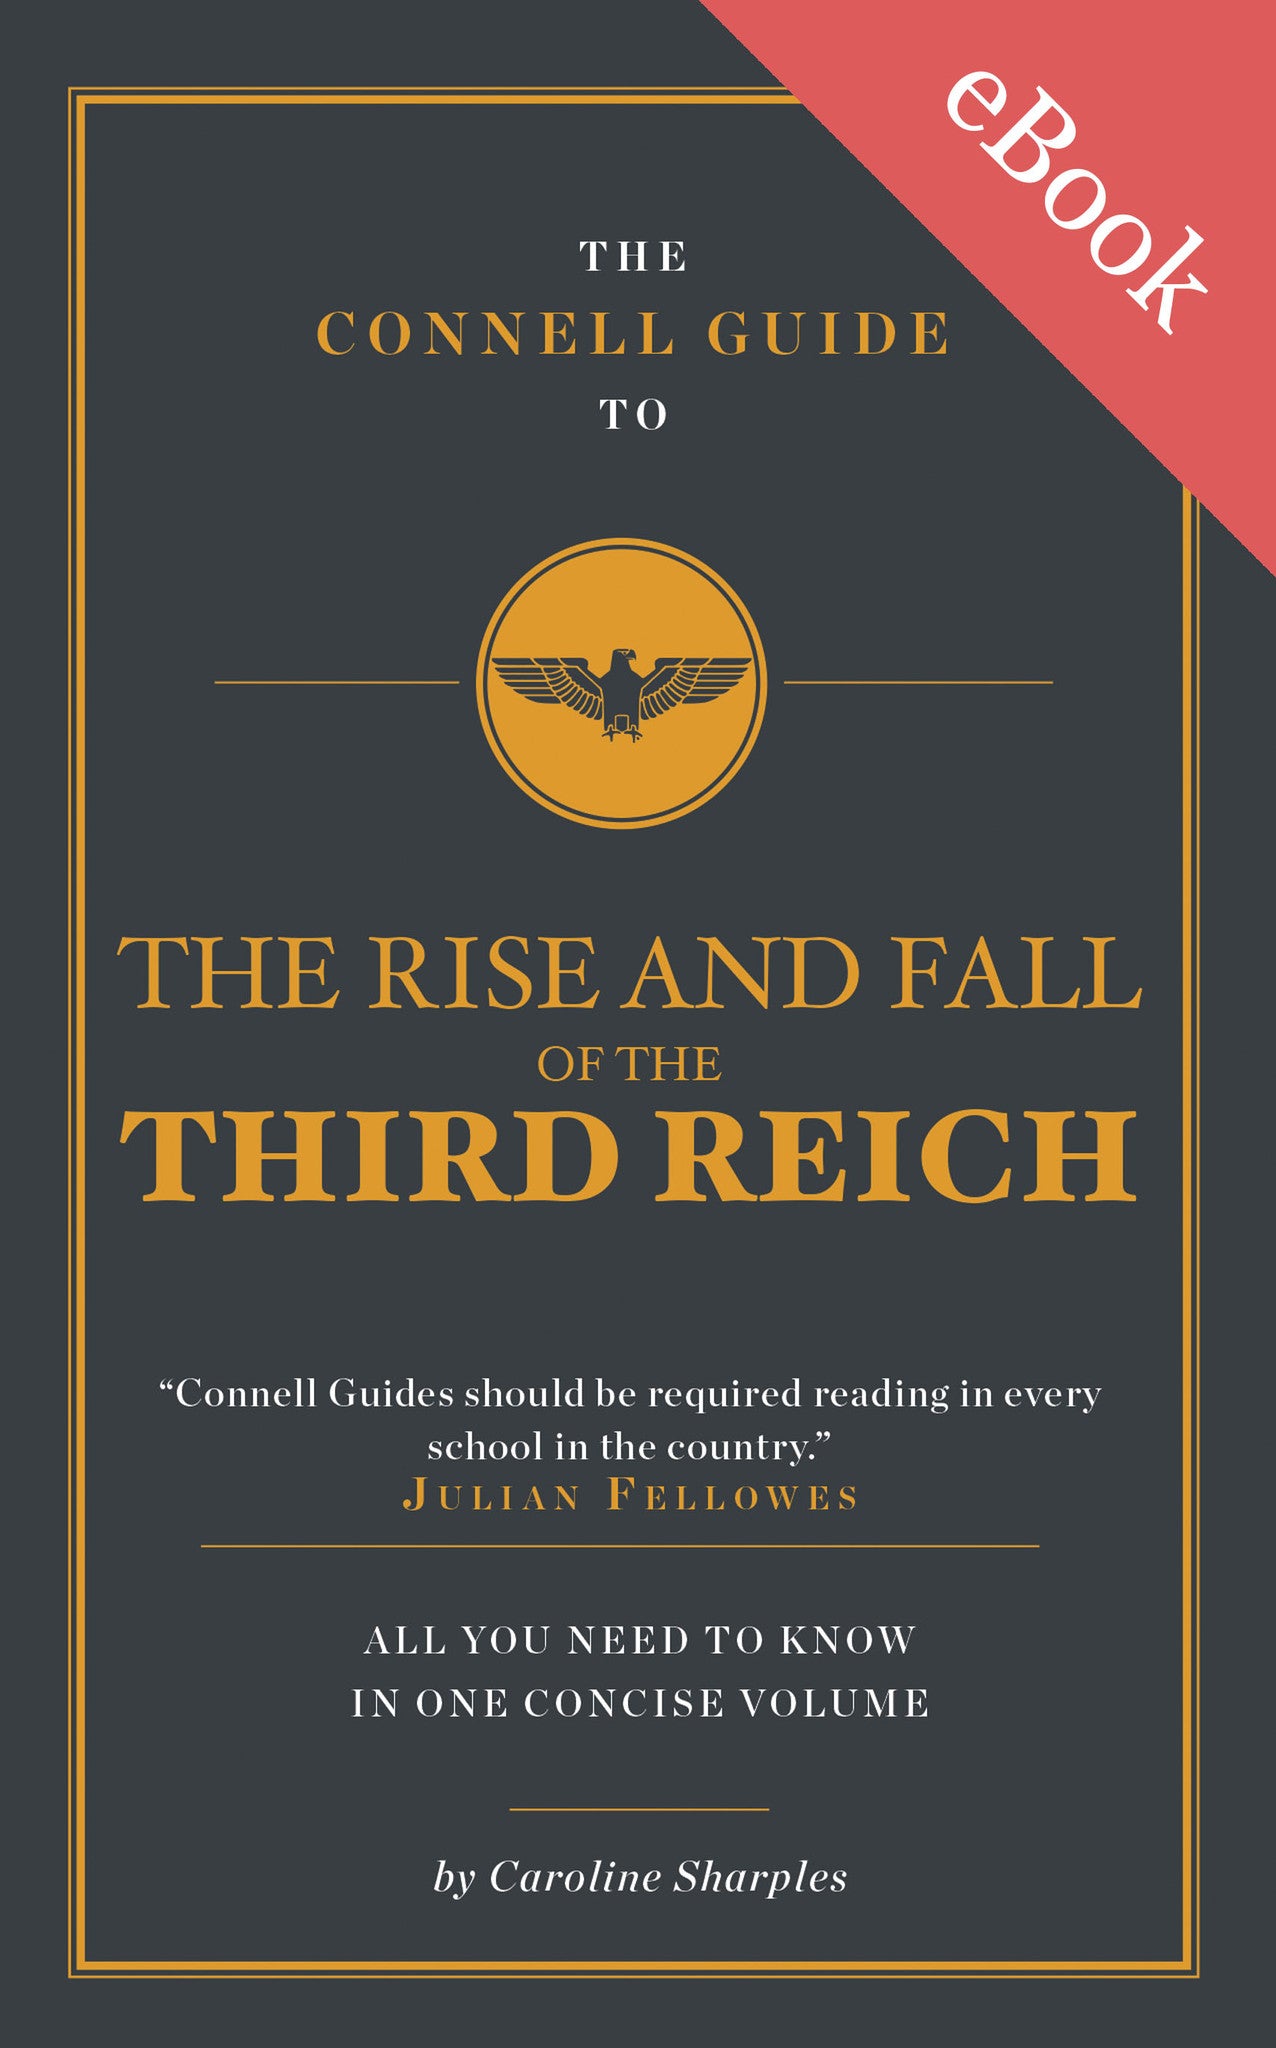 The Connell Guide to The Third Reich